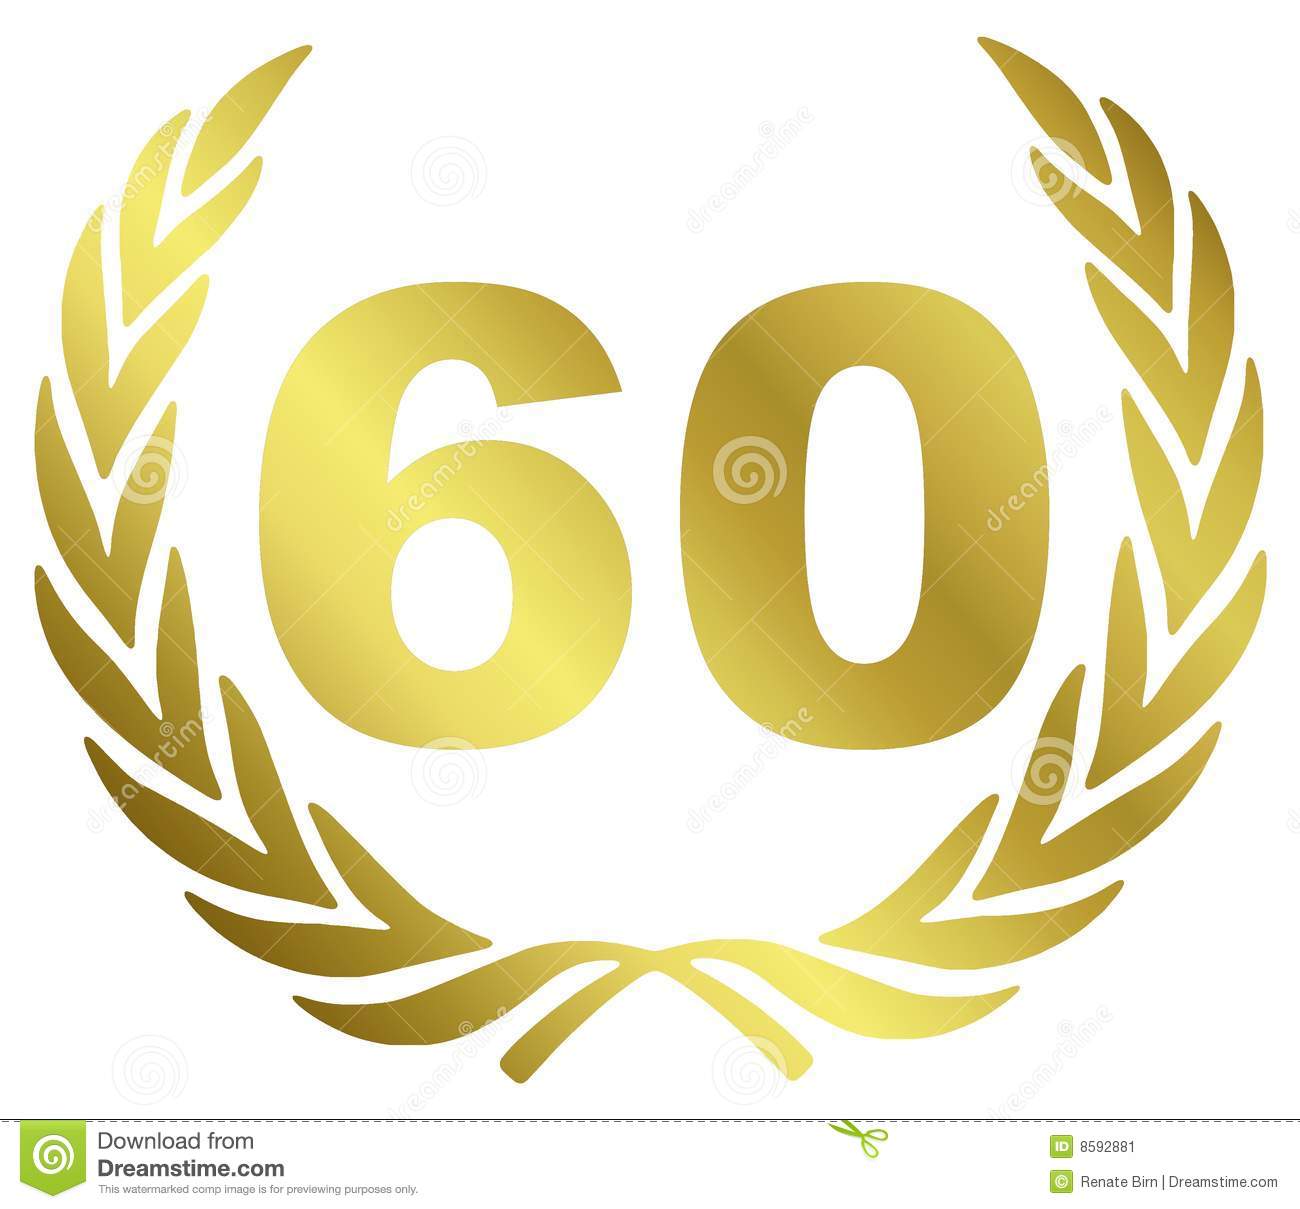 The Number 60 Clipart   Cliparthut   Free Clipart